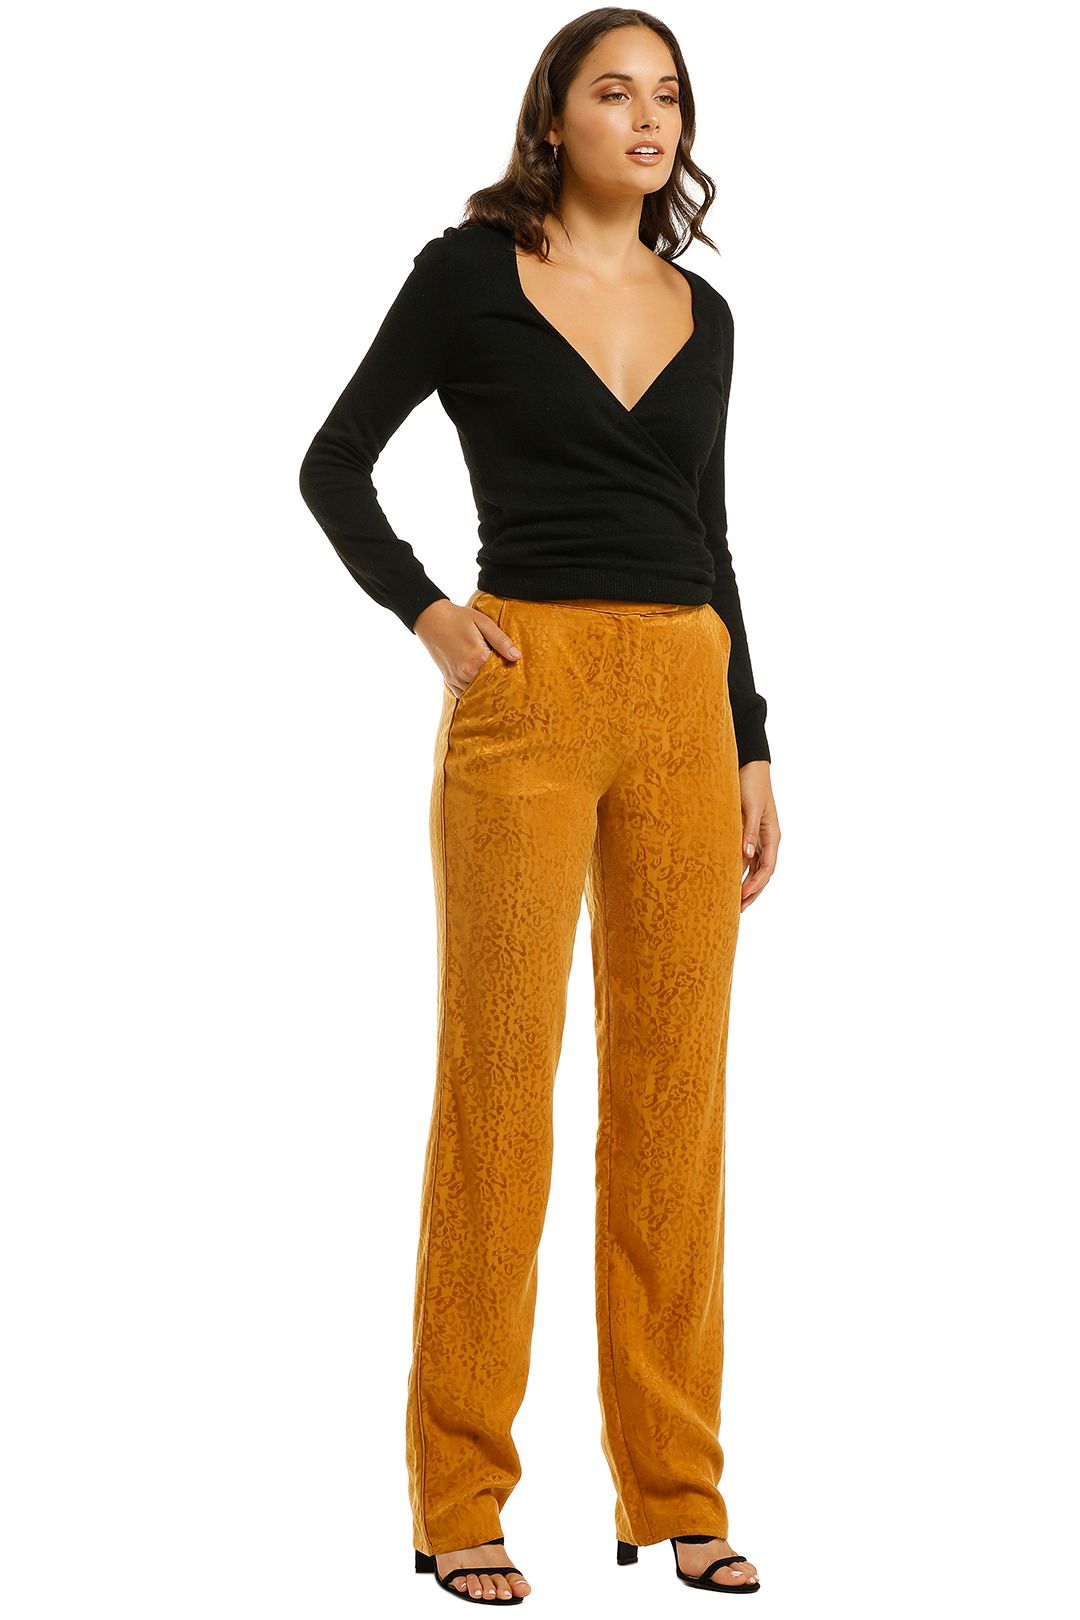 Grace-Willow-Delta-Pant-Inca-Gold-Side